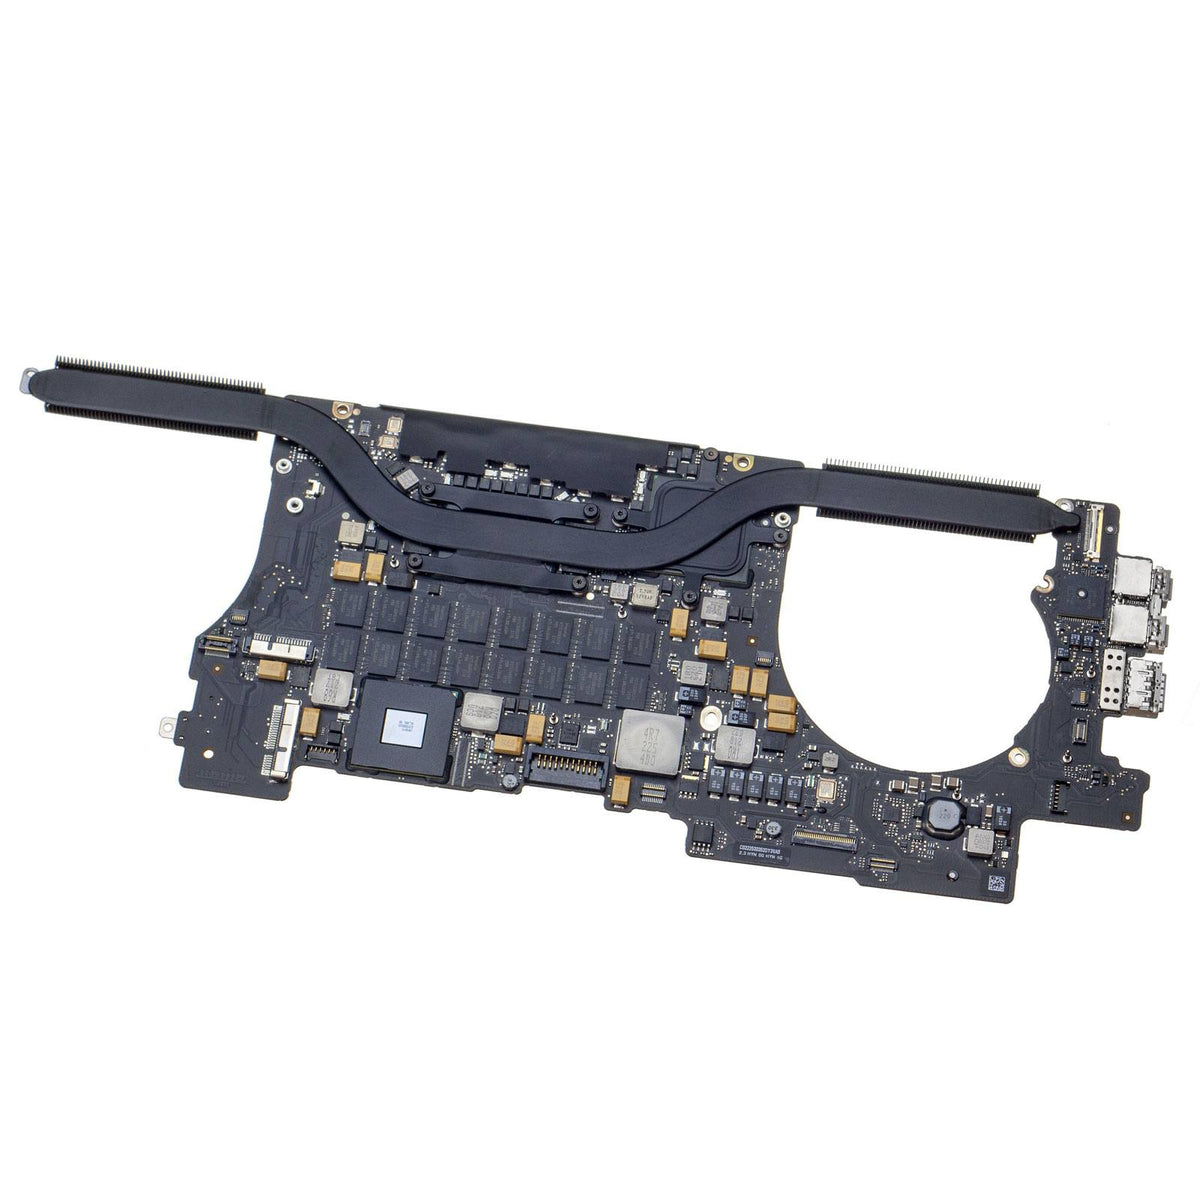 MOTHERBOARD FOR MACBOOK PRO RETINA 15" A1398 (MID 2012-EARLY 2013)